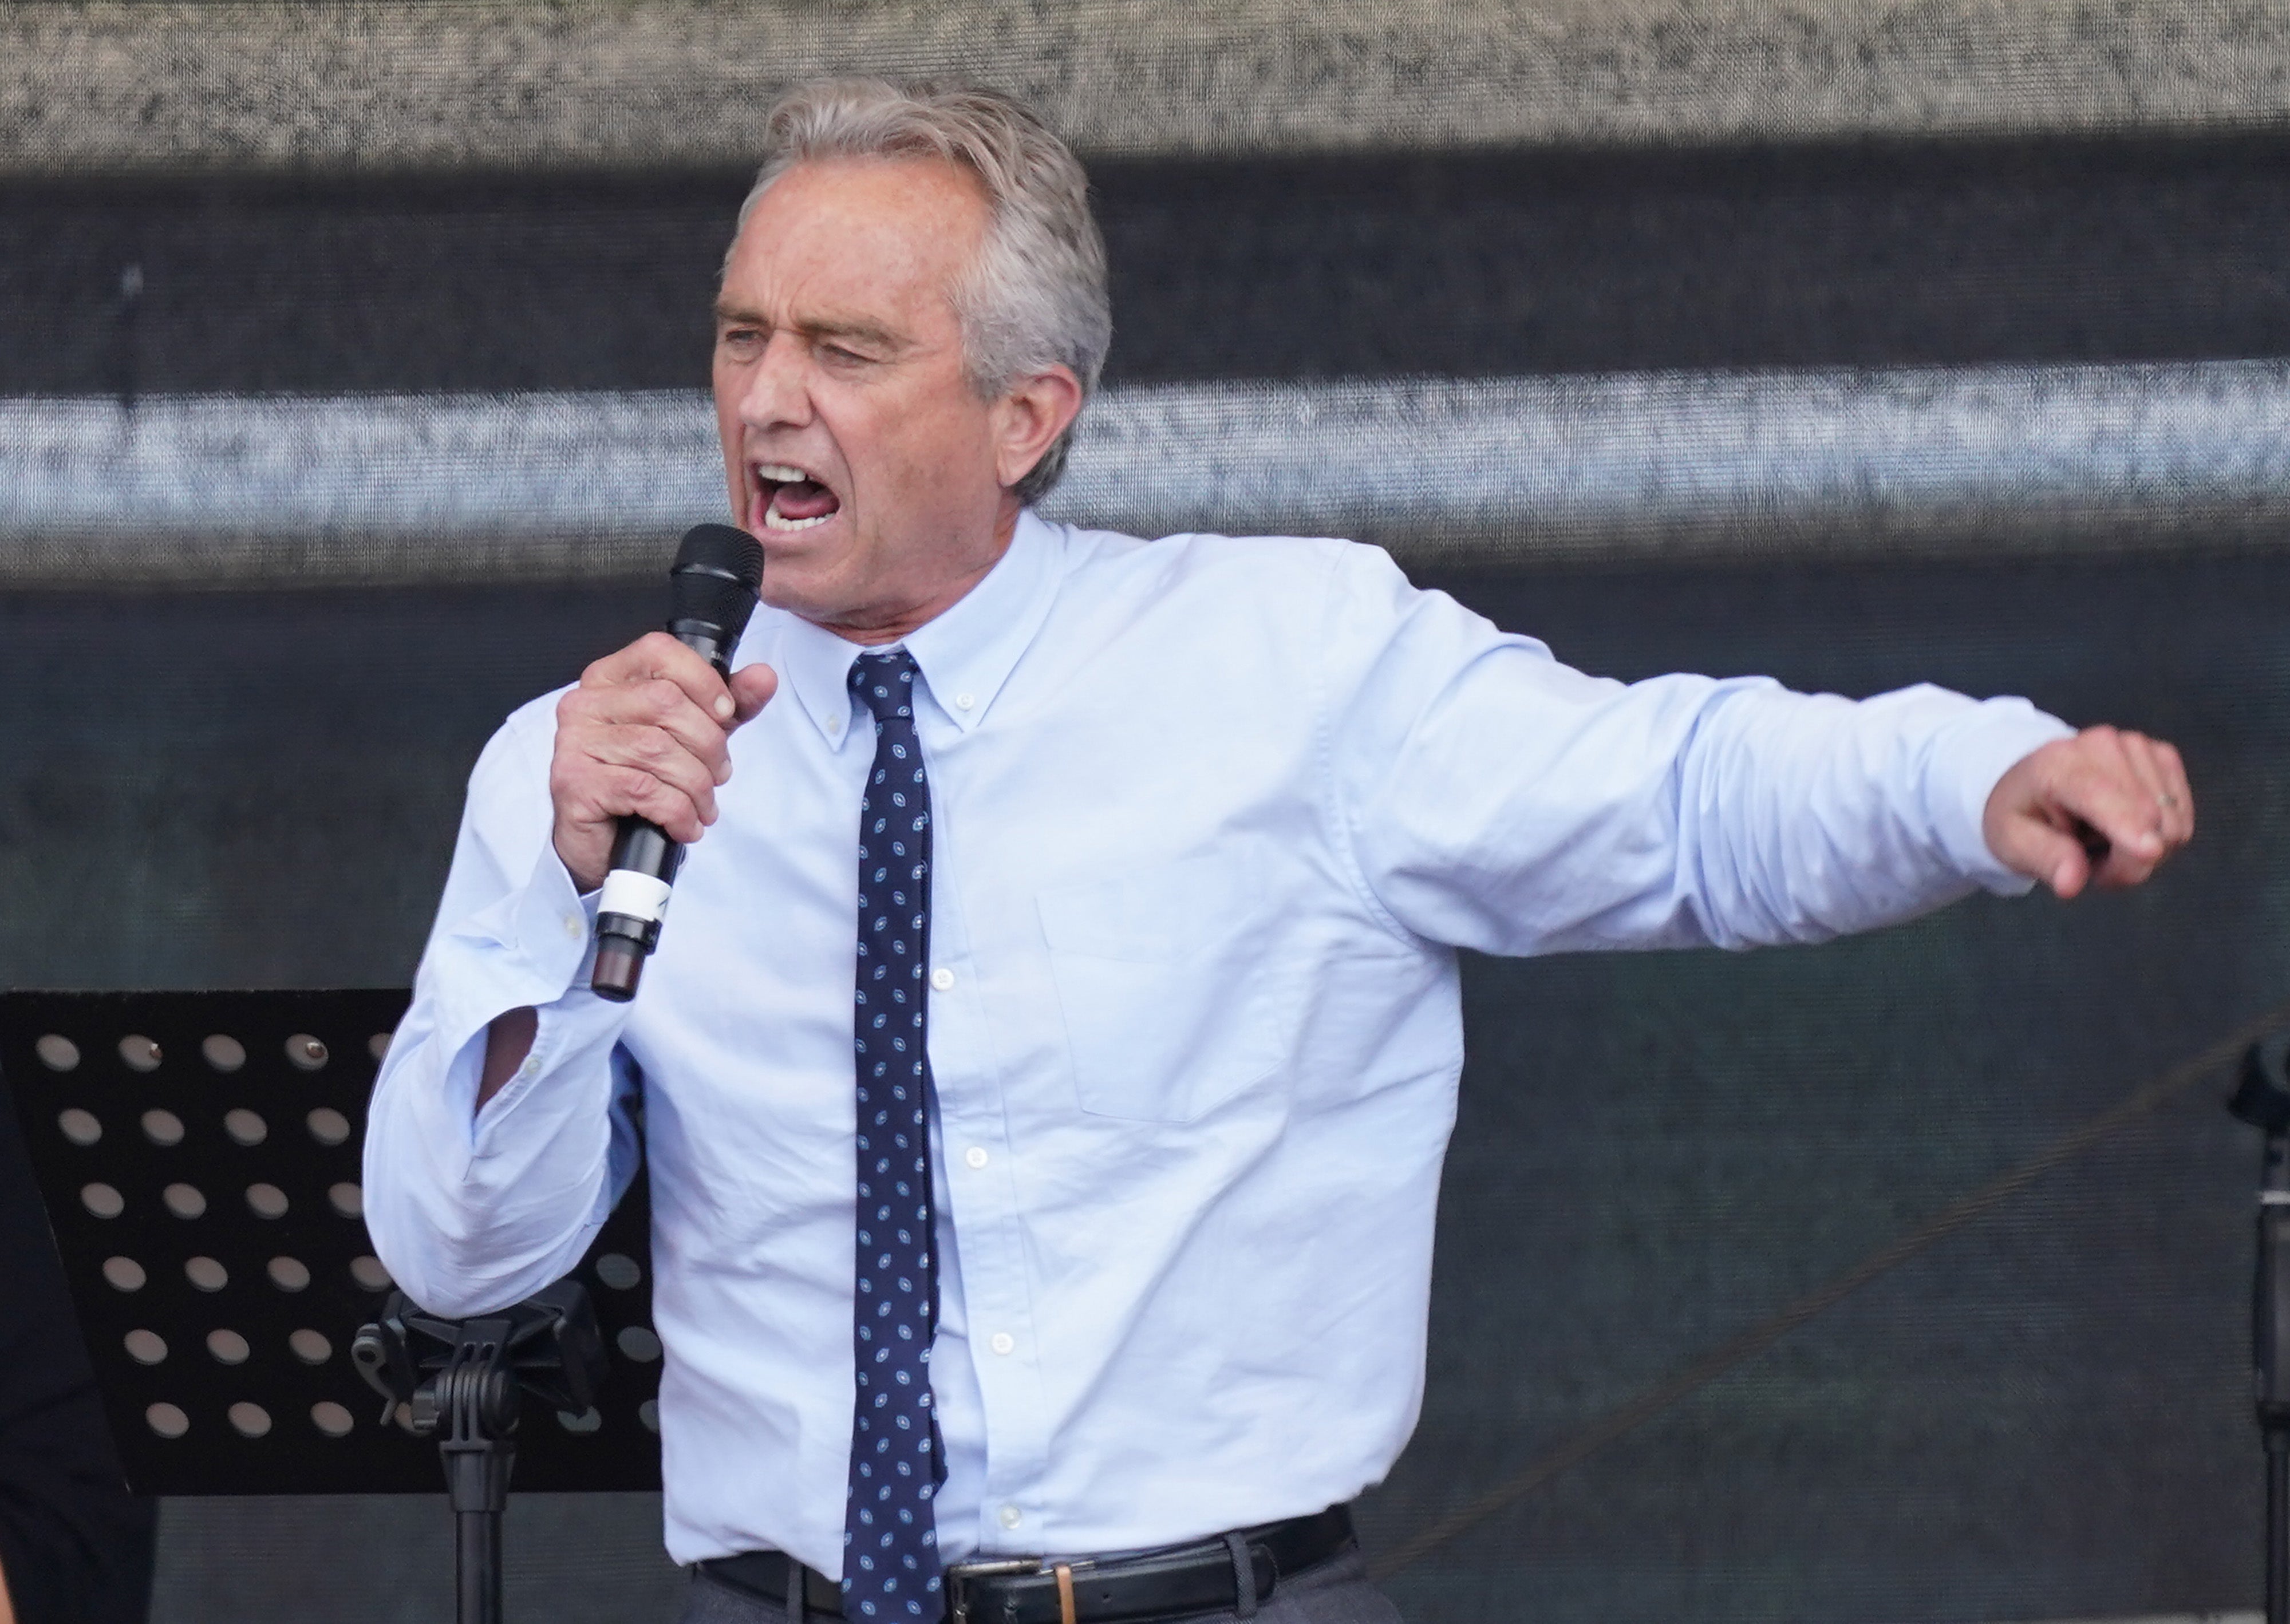 RFK Jr. is running for president in the 2024 elections